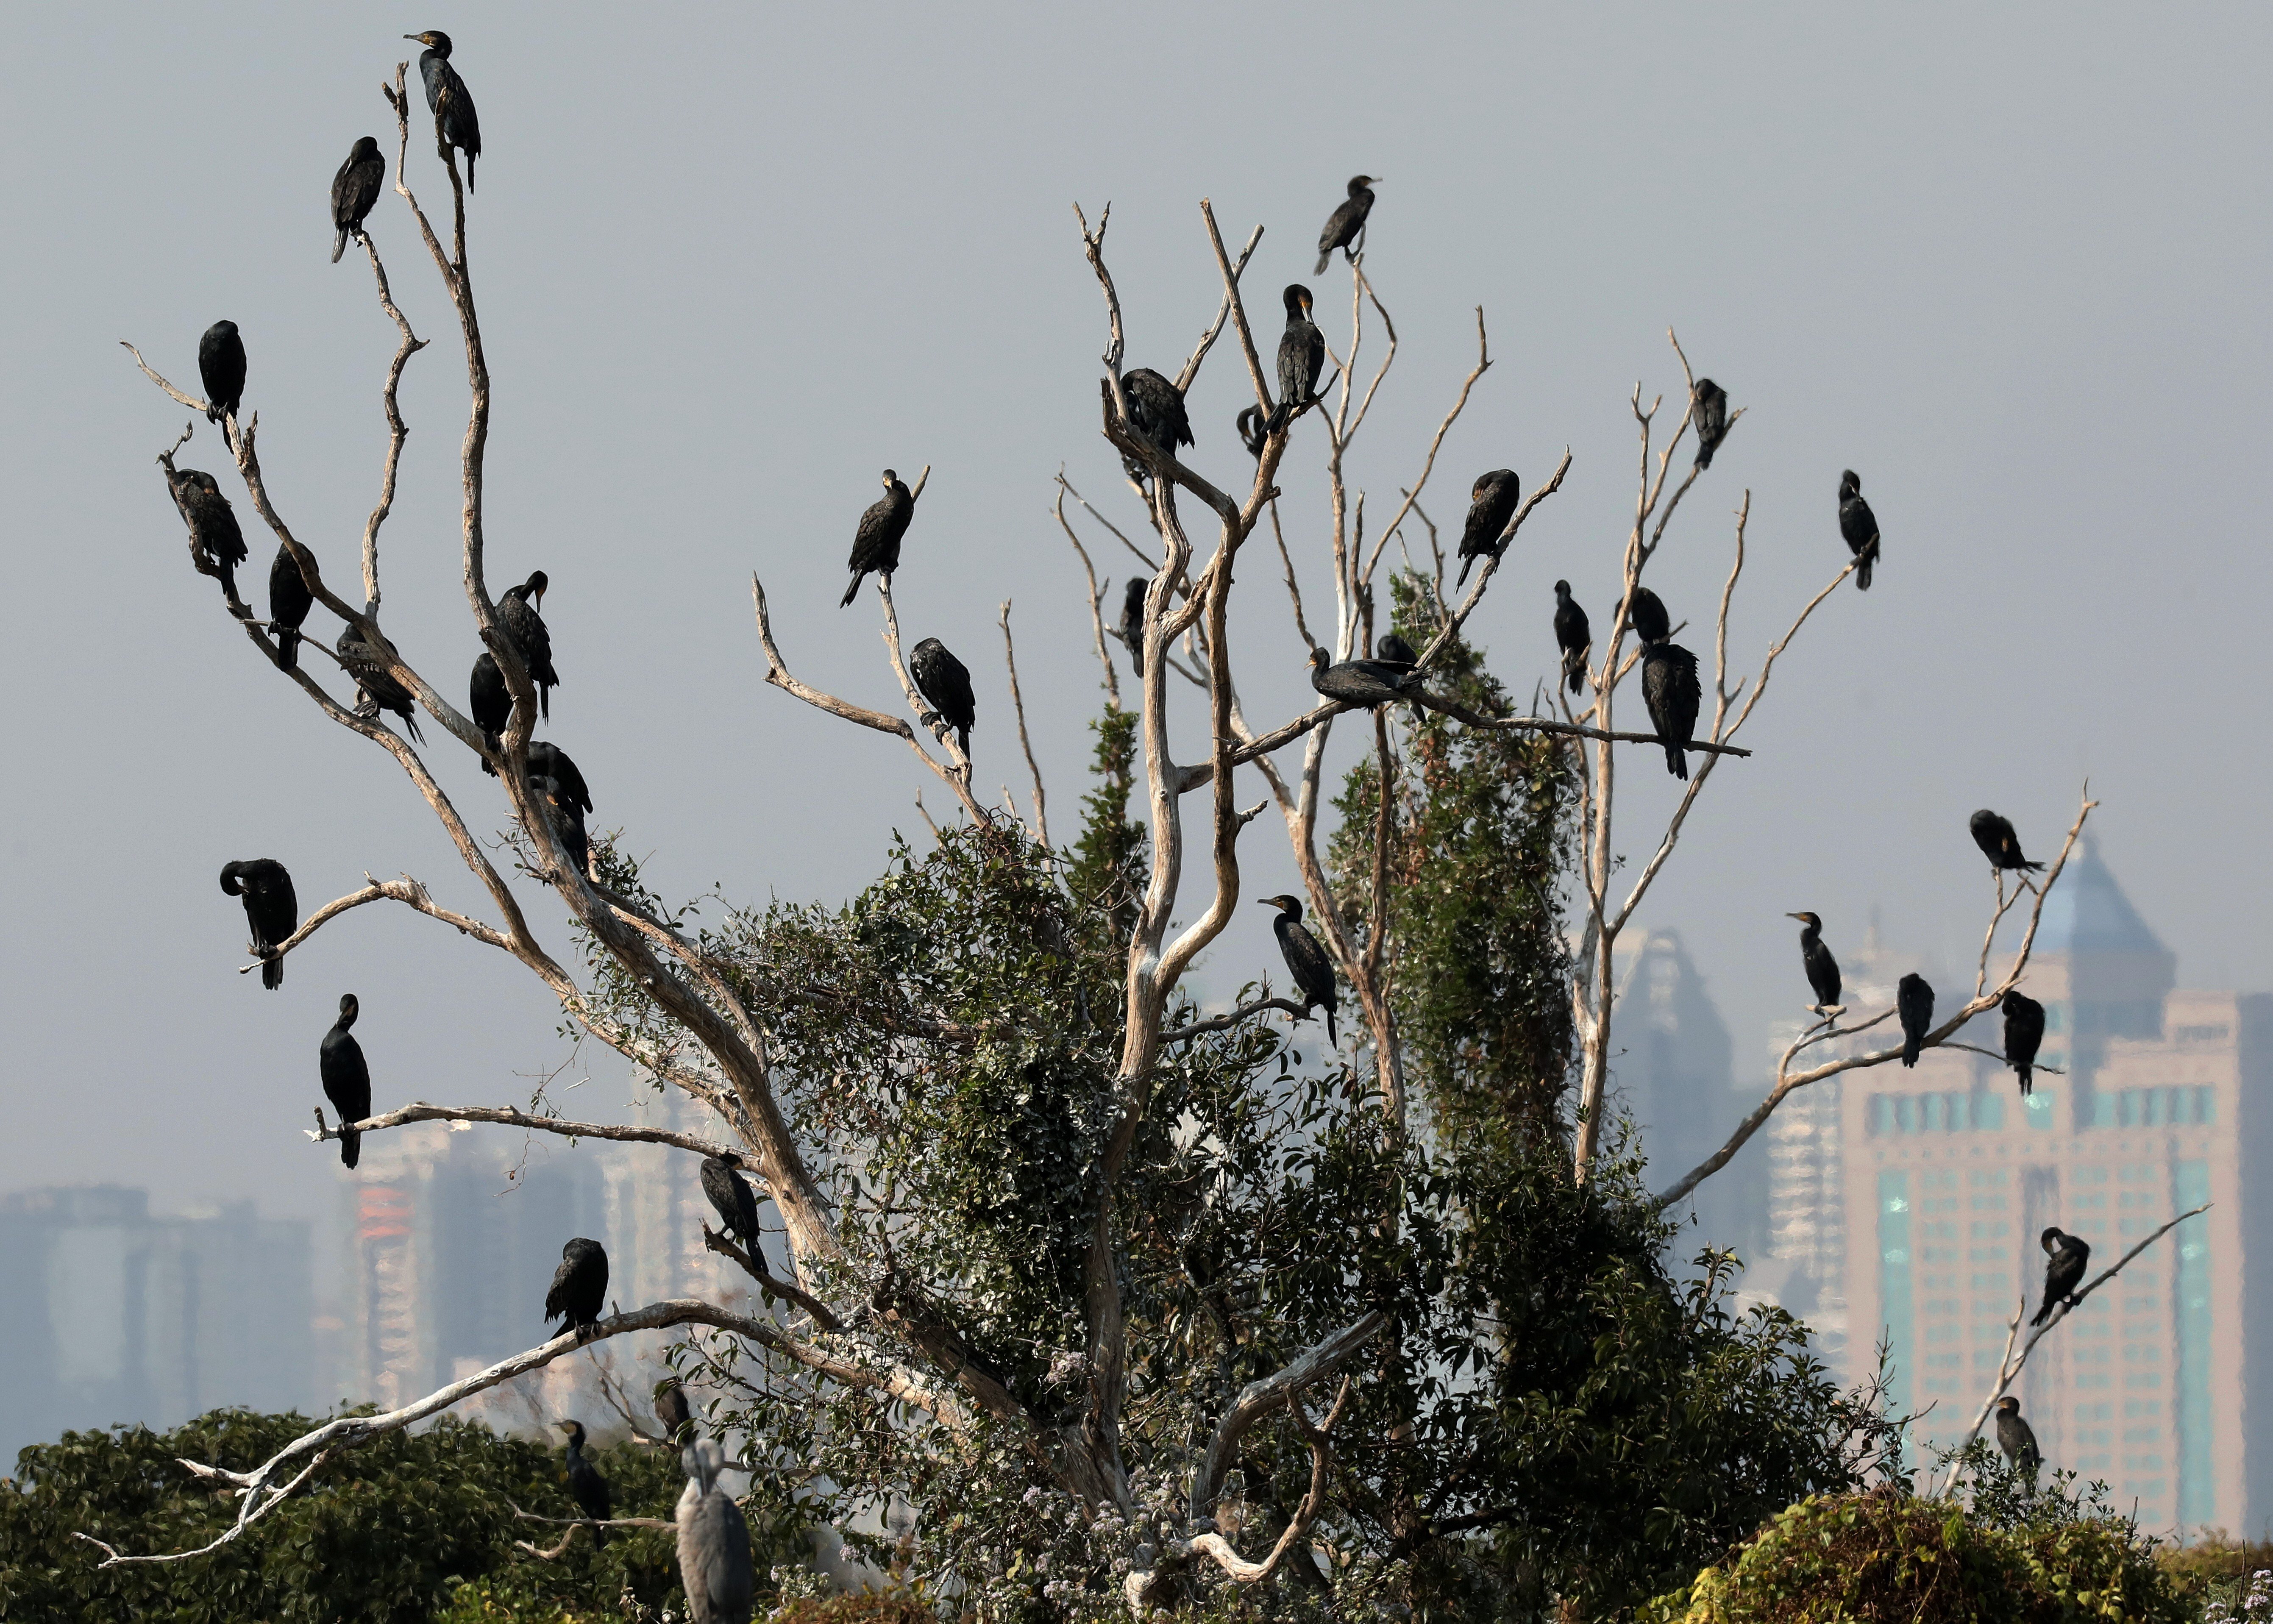 Mai Po is Hong Kong’s largest remaining wetland and recognised for its global importance for sustaining bird migrations. Photo: Nora Tam